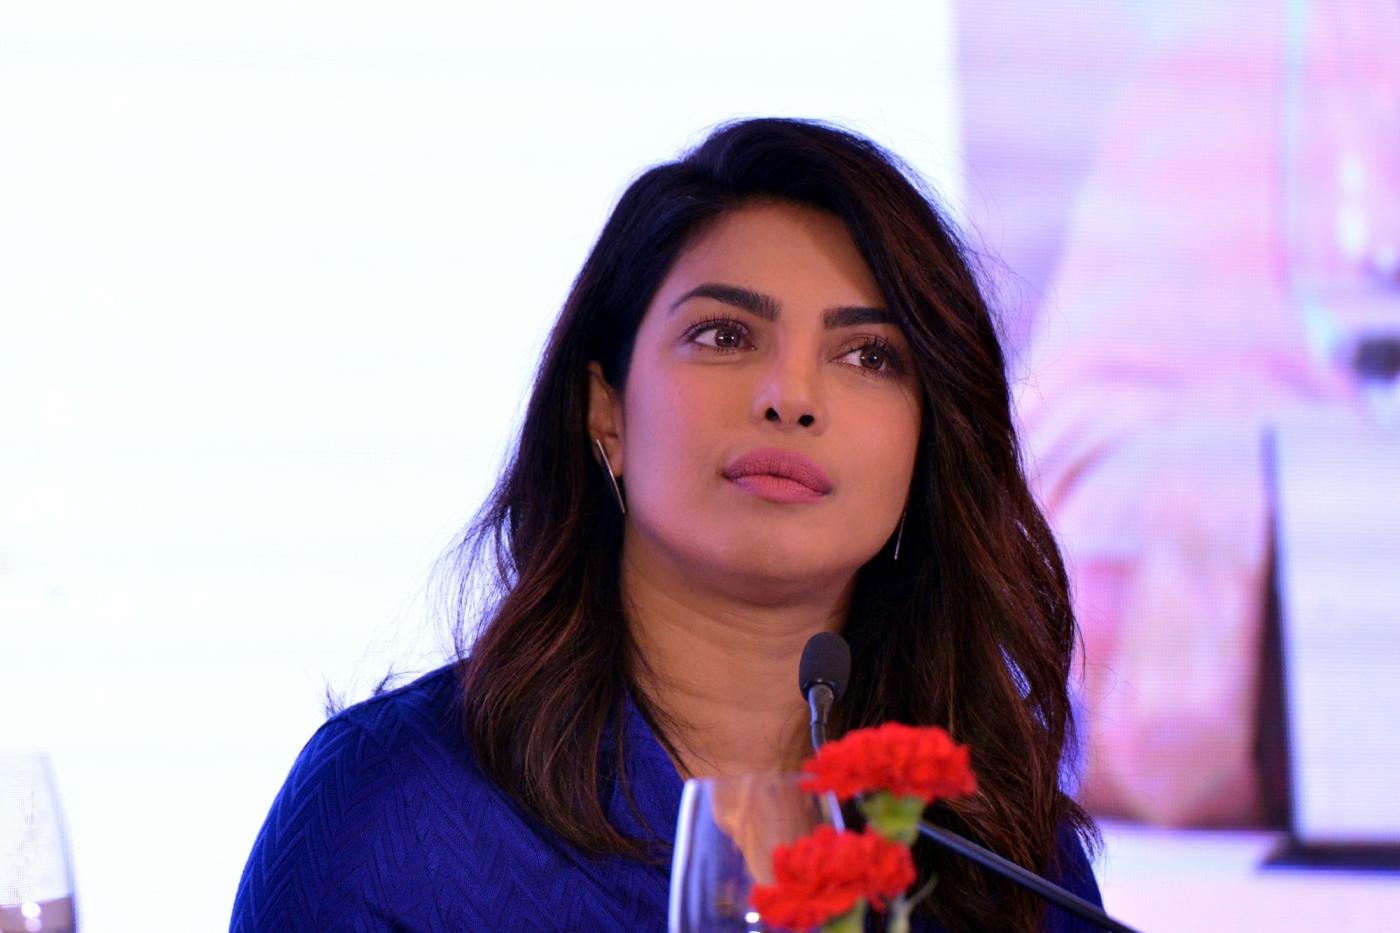 New Delhi: Actress Priyanka Chopra during a panel discussion at Curtain Raiser for Partners' Forum 2018, in New Delhi on April 11, 2018. (Photo: IANS) by .